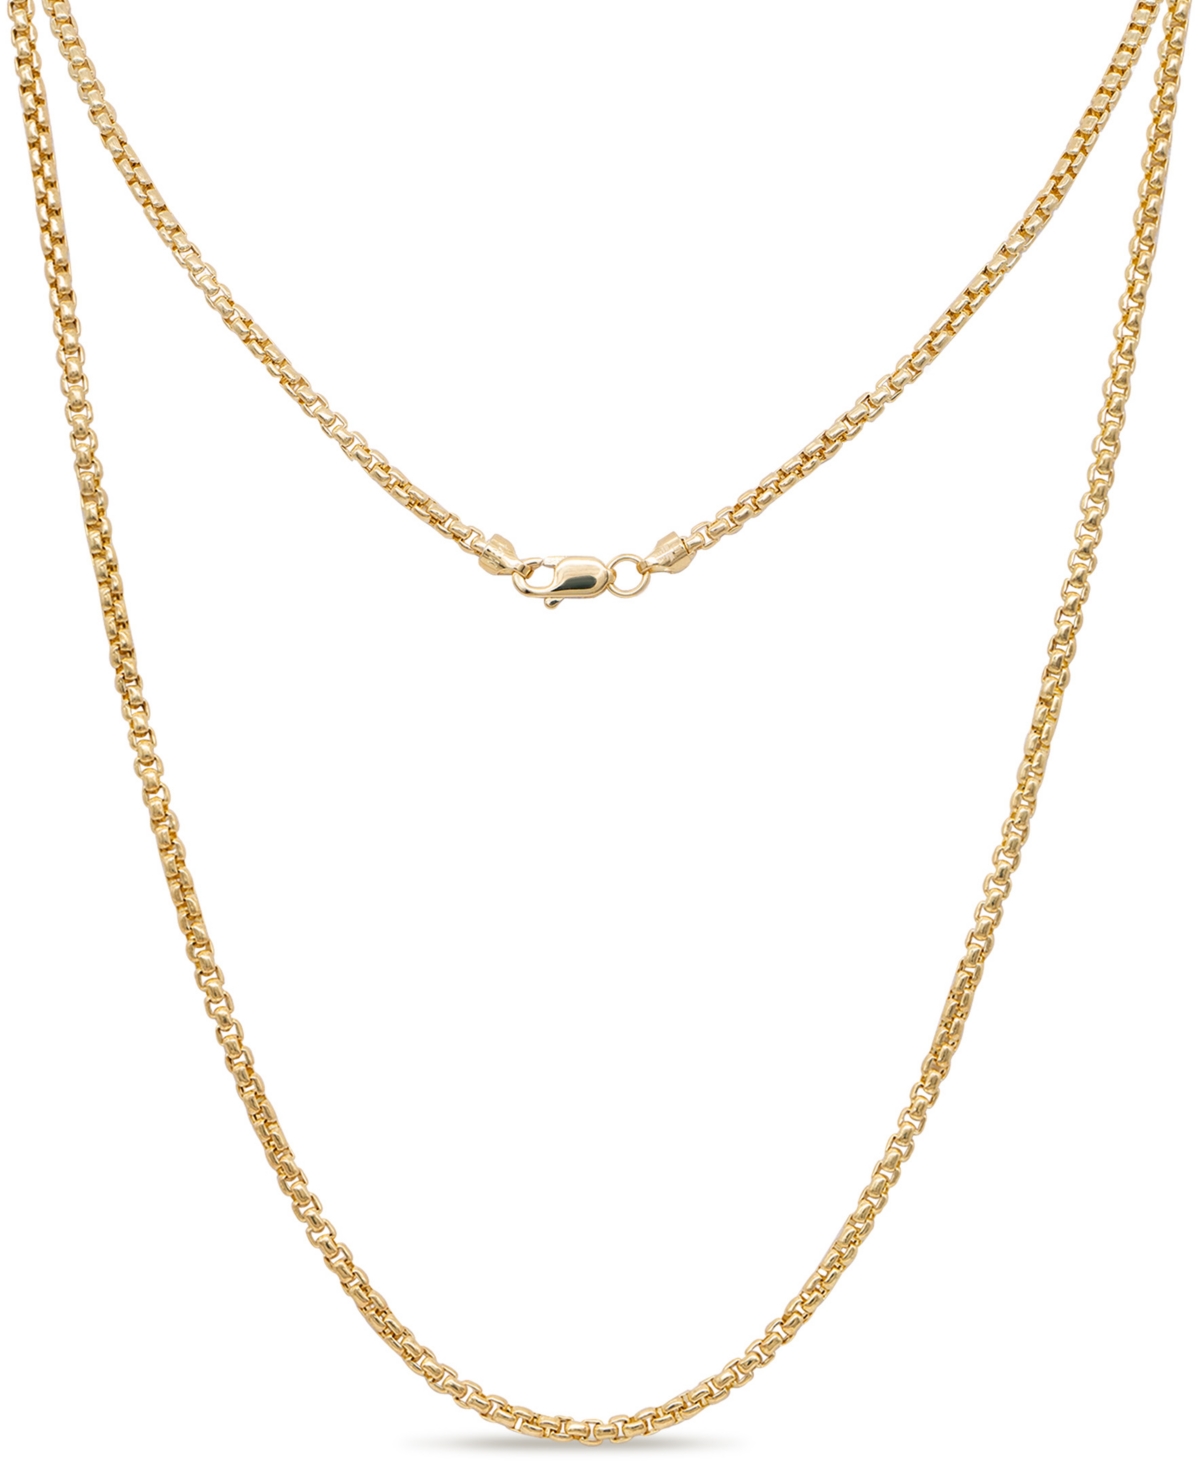 14K Gold Box Round 2mm Chain Necklace, 26", approx. 5.6grams - Gold